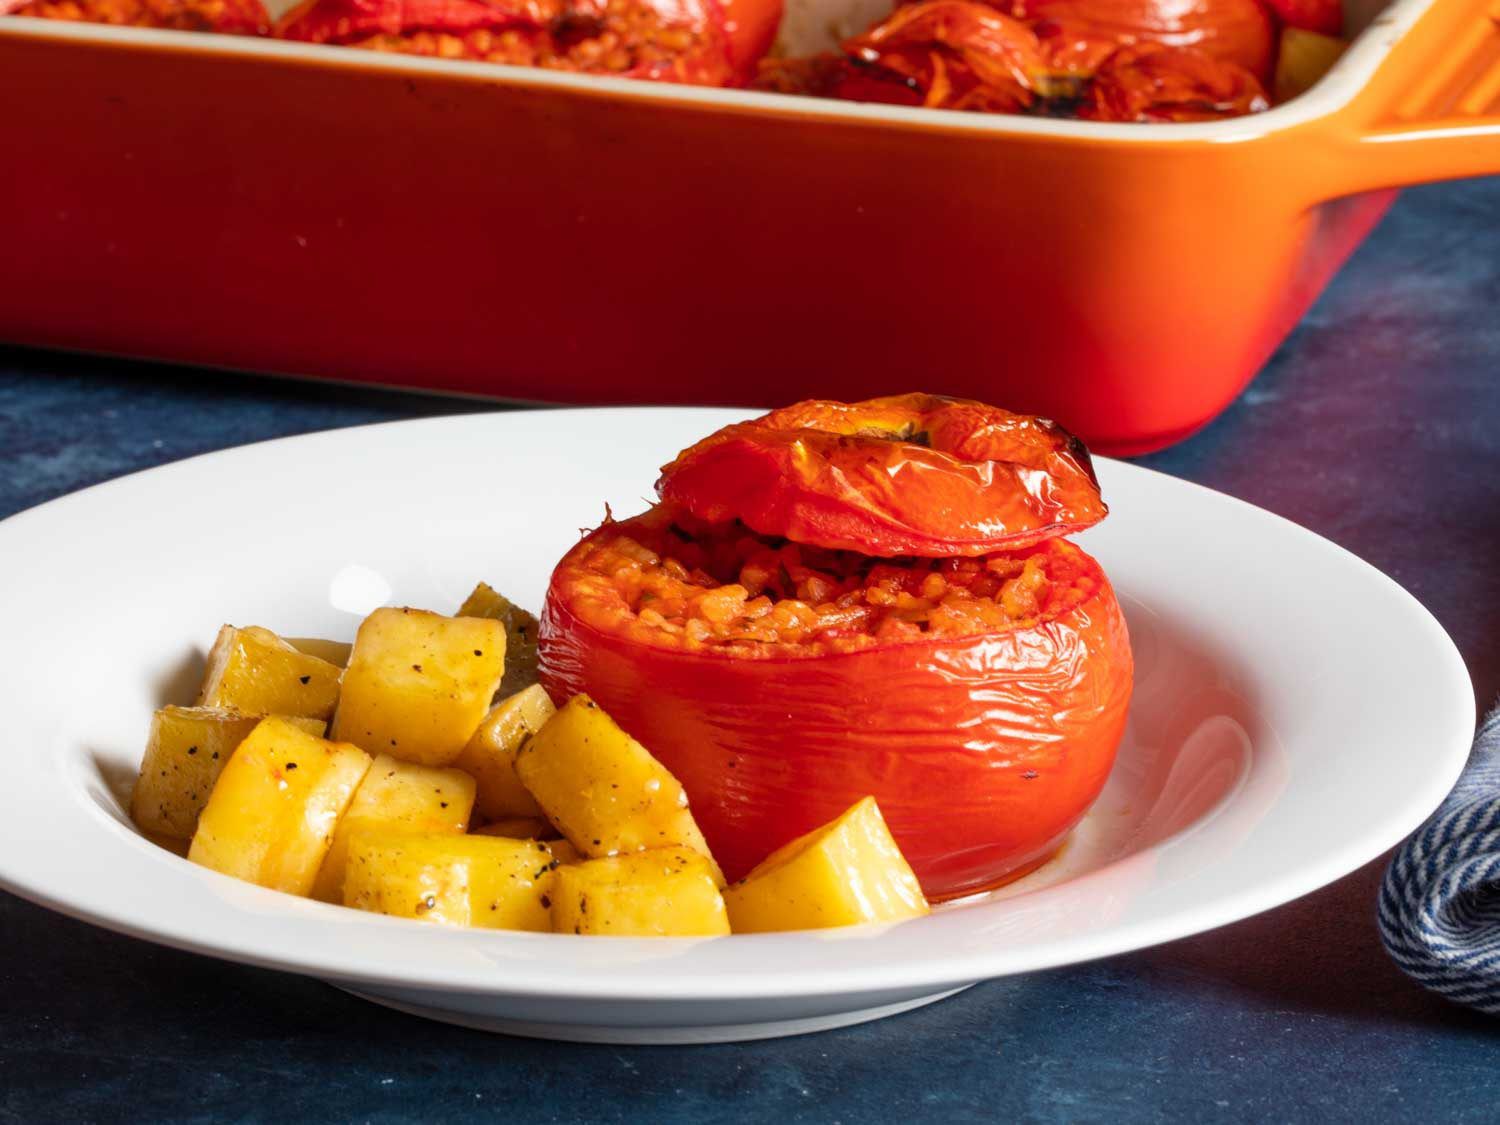 Close-up side view of a plated rice-stuffed tomato with roast potatoes on the side.